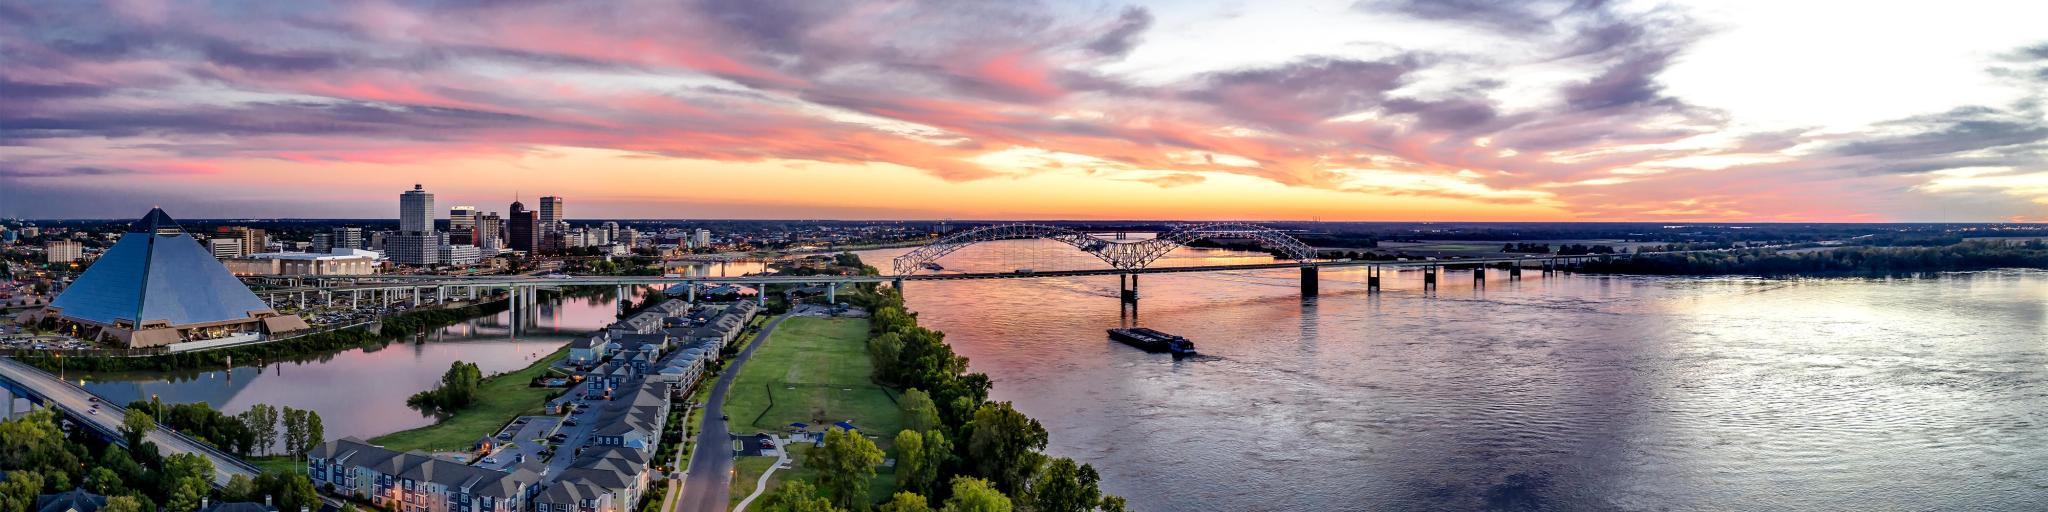 Memphis, Tennessee, USA taken as an aerial panoramic view of Memphis, including Bass Pro Shops at the Pyramid, Downtown, the Wolf River Canal, and the Hernando Desoto Bridge at sunset.